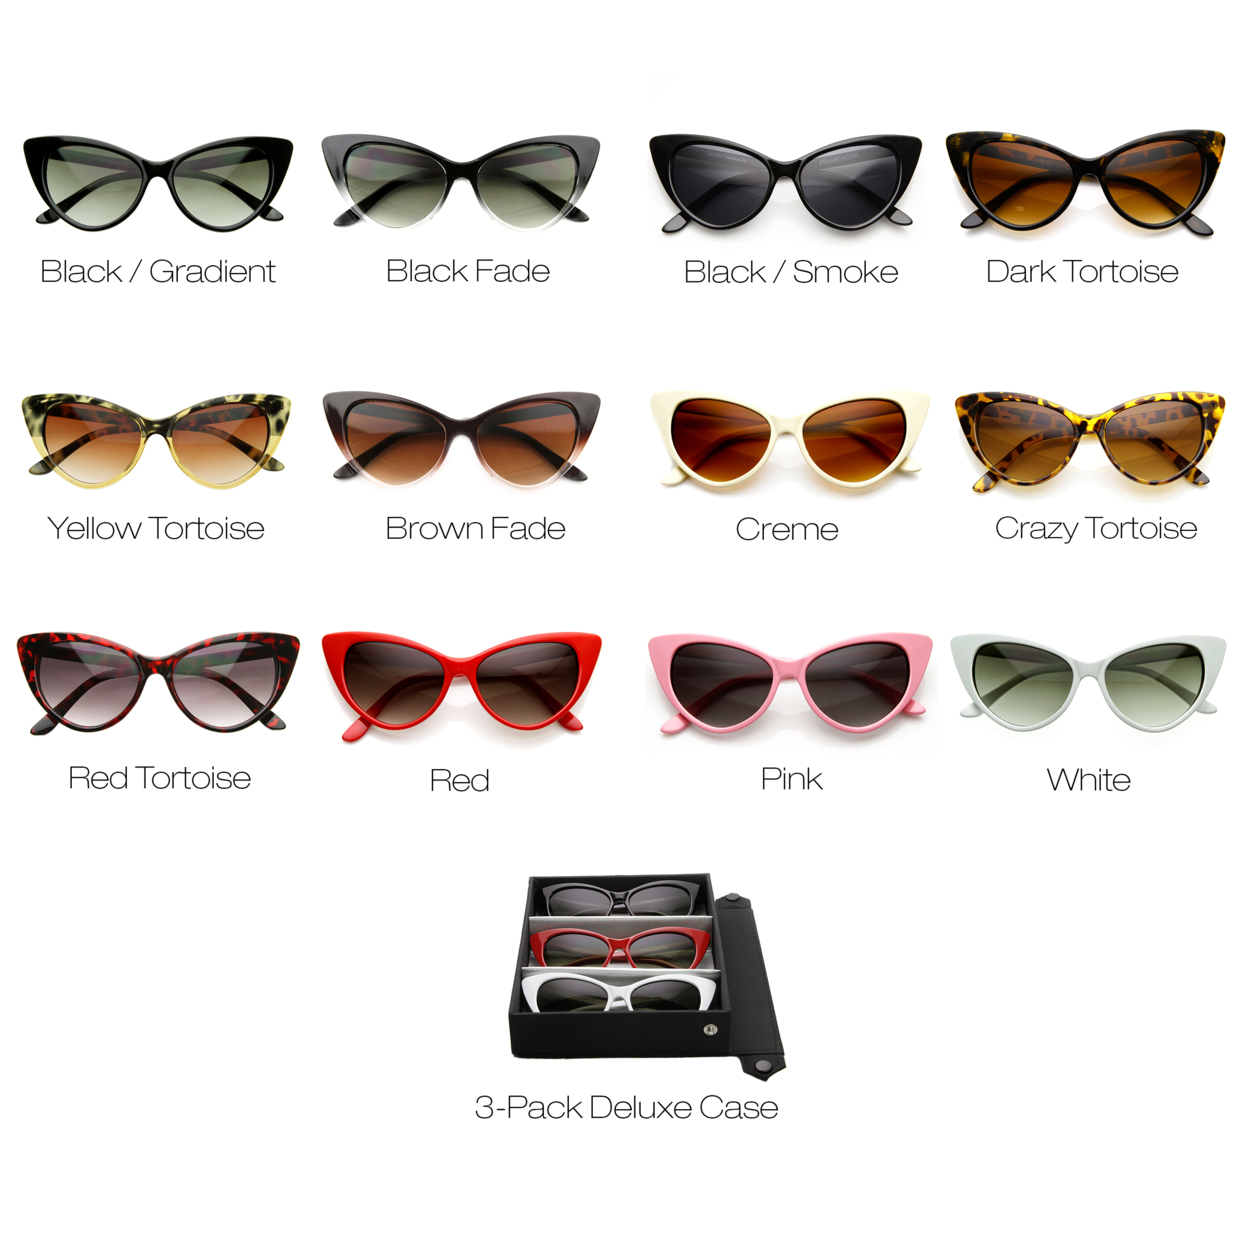 Super Cateyes Vintage Inspired Fashion Mod Chic High Pointed Cat-Eye Sunglasses - 8371 - Black-Fade